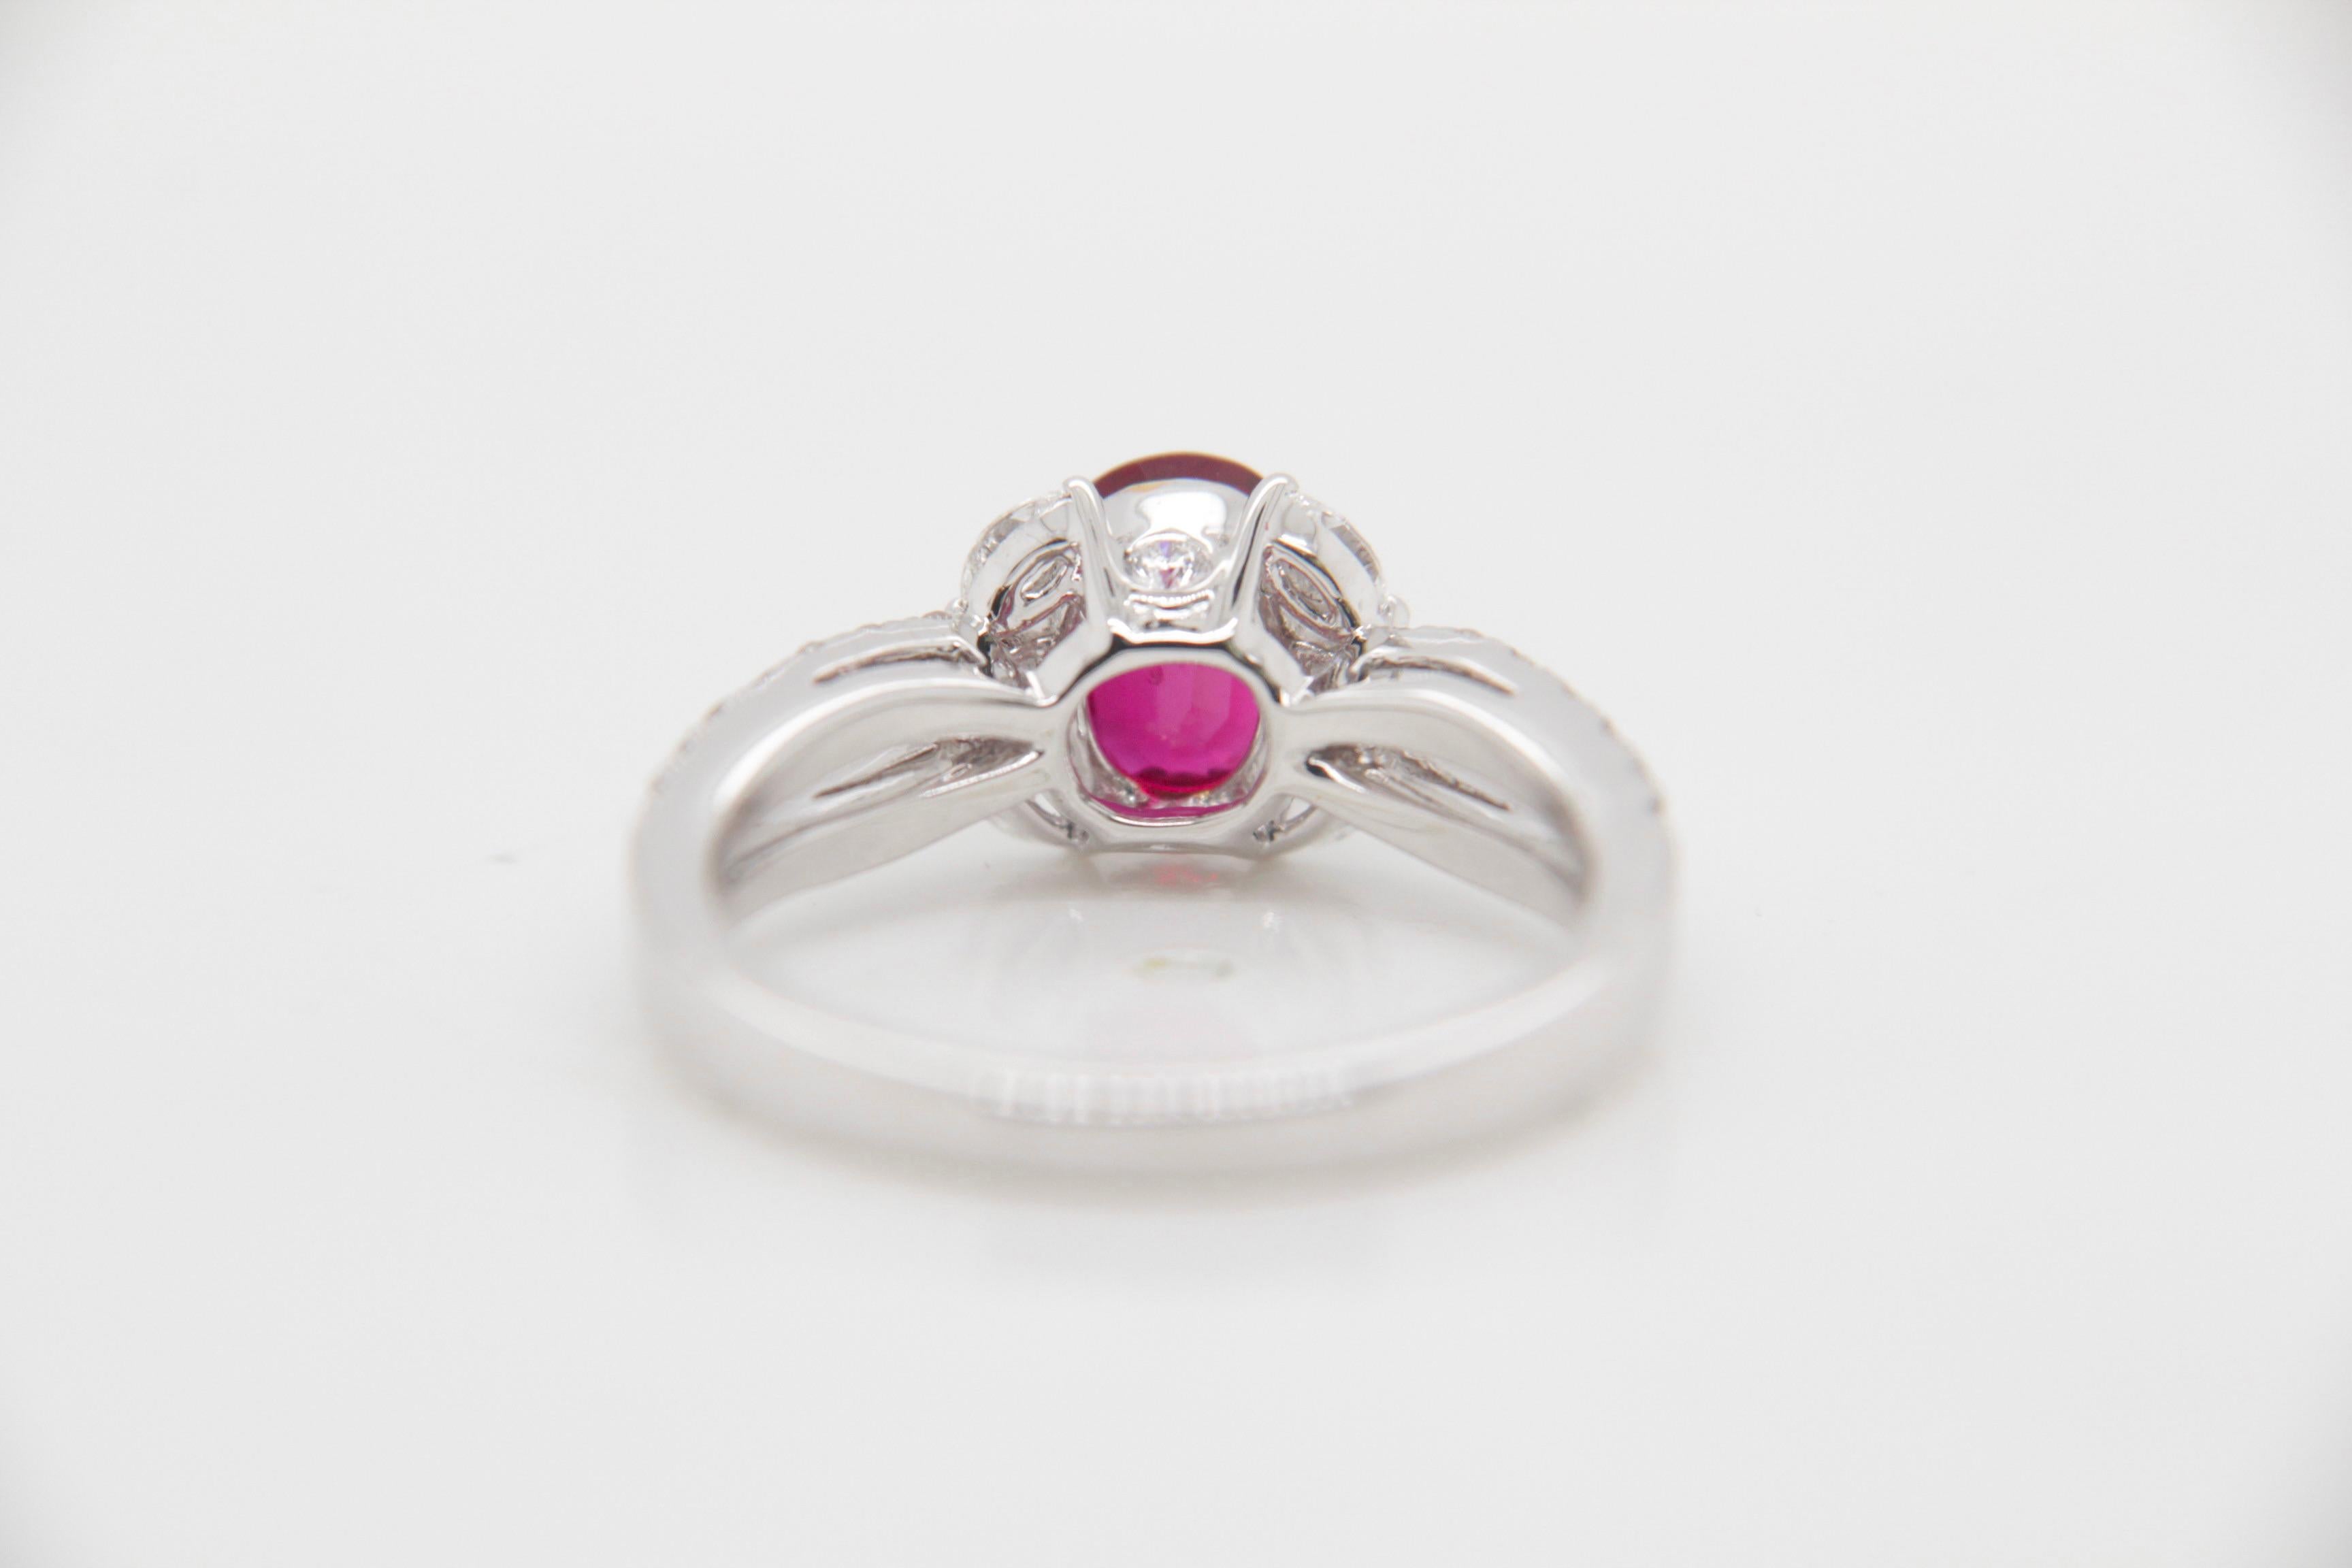 Introducing a contemporary marvel from Rewa Jewelry, this ruby and diamond ring is a captivating blend of modern style and timeless elegance—an embodiment of the brand's commitment to exquisite craftsmanship and sophisticated design.

Inspired by